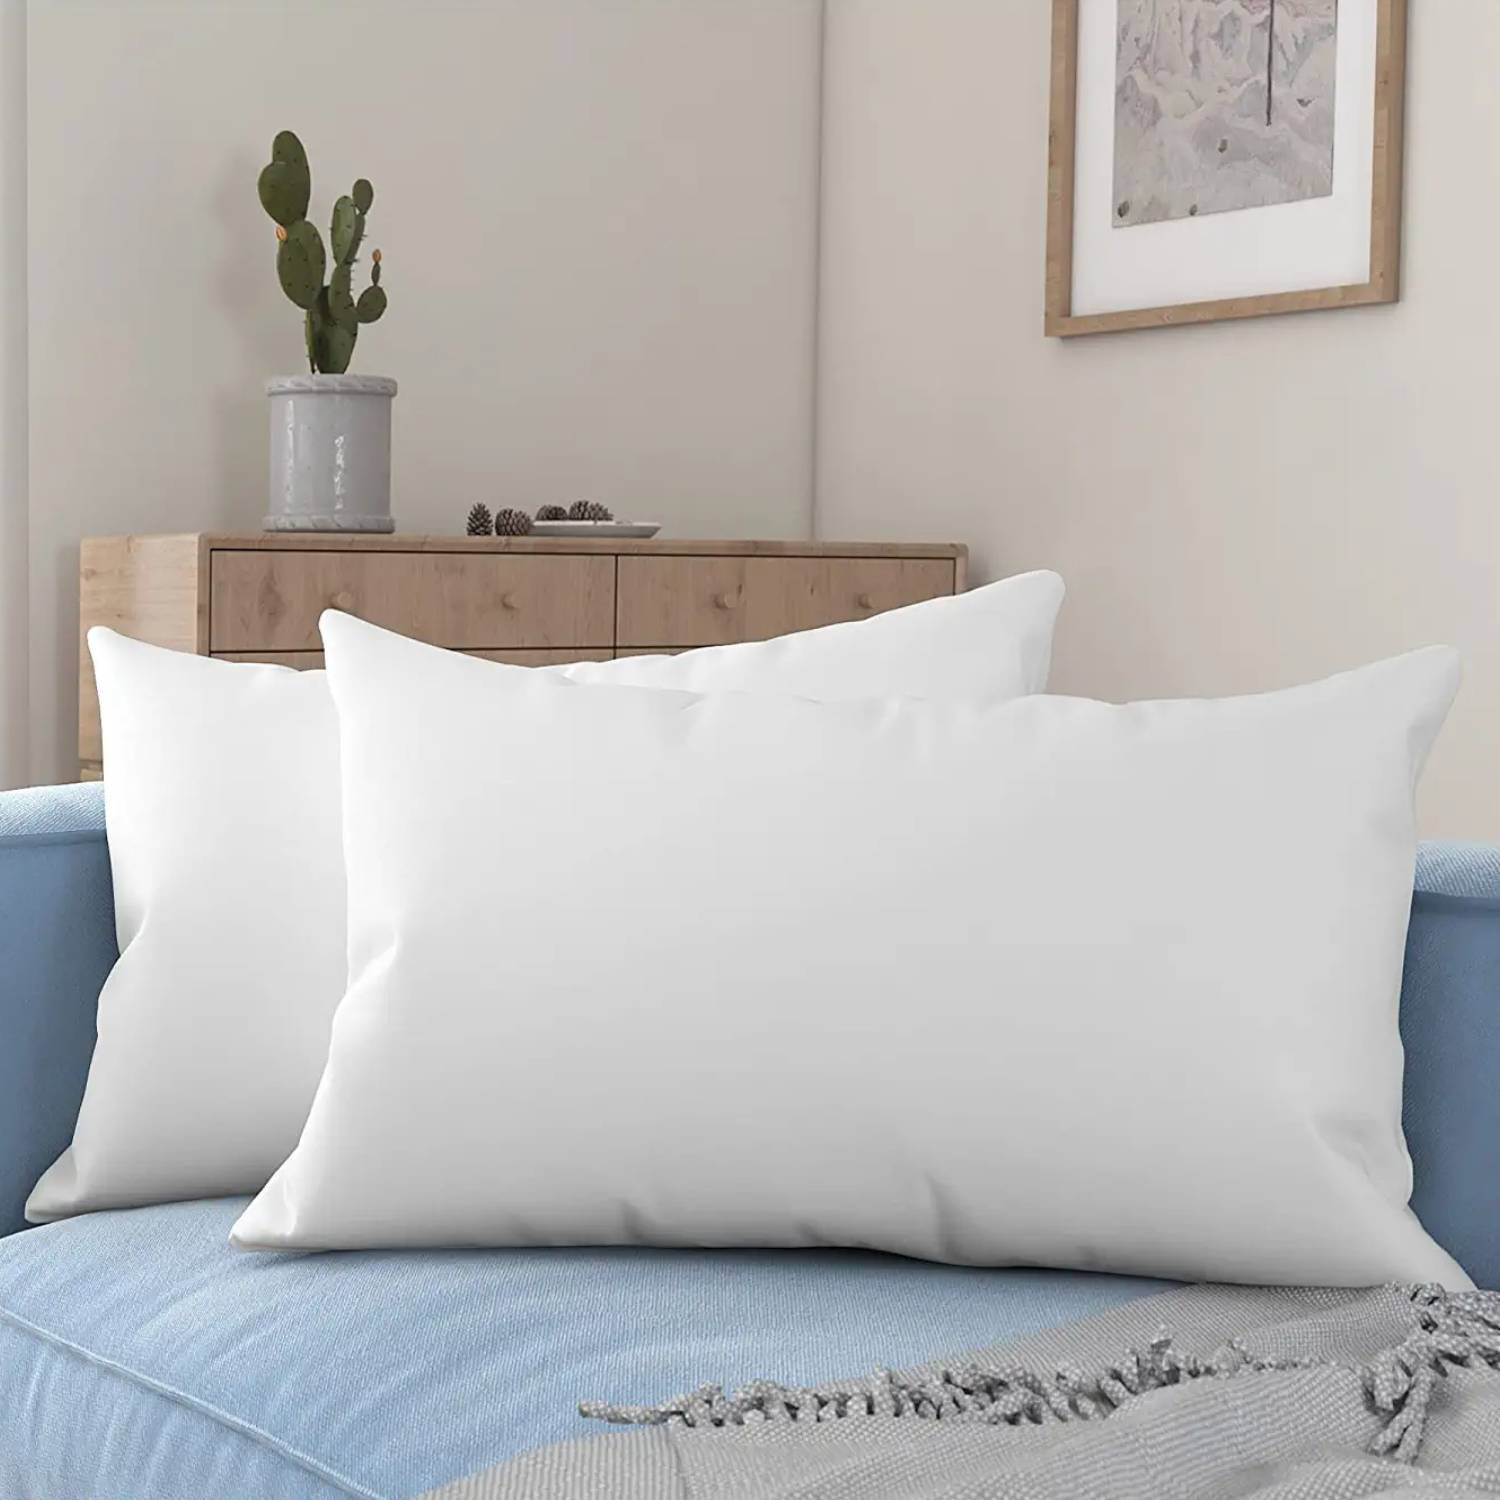 Decorative Throw Pillow Insert Down Feathers Fill 100% Cotton Cover Square Pillow Insert (Set of 2) Alwyn Home Size: 16 x 16